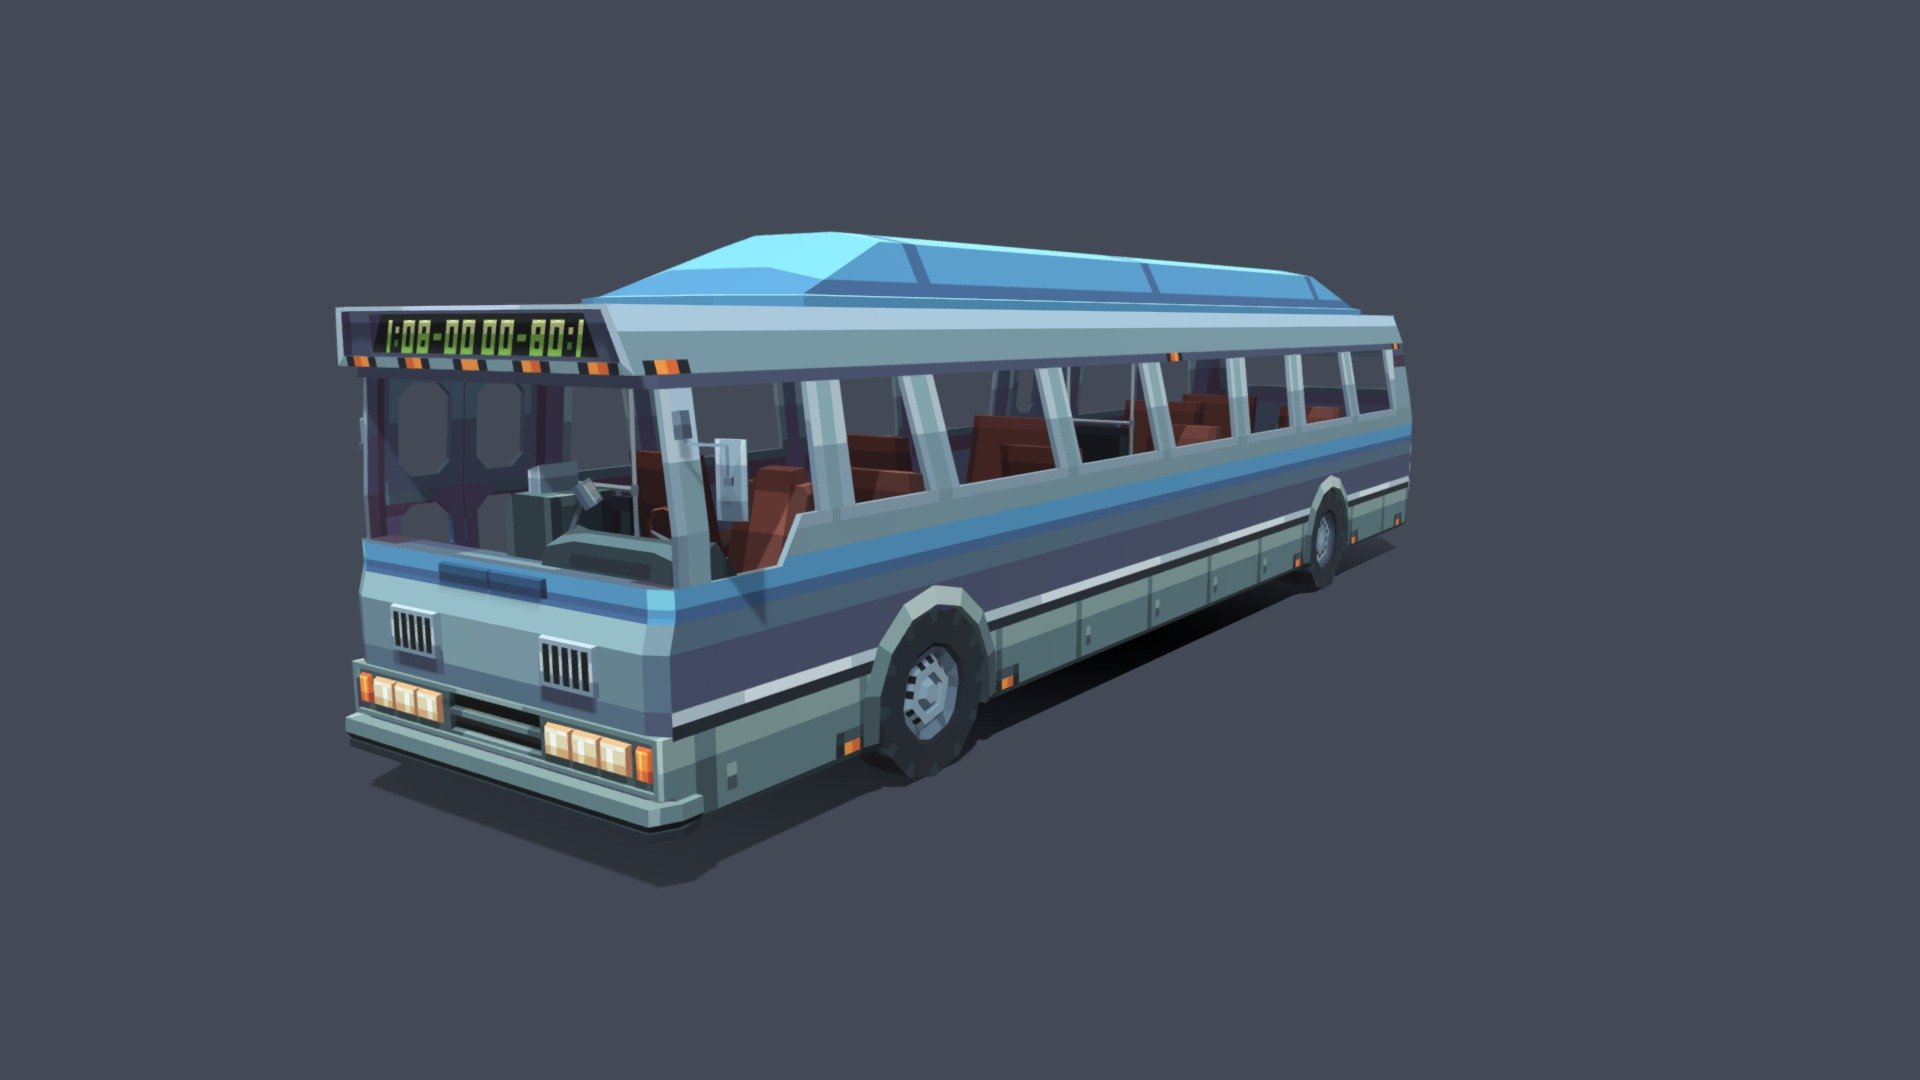 _ #Lowpoly #PixelArt #Blockbench

Want to have a custom model? Contact: wasteland4013 (Discord)|Comms Open - City Bus - Low Poly Pixel Art car model - 3D model by W'Projects (@wprojects) 3d model